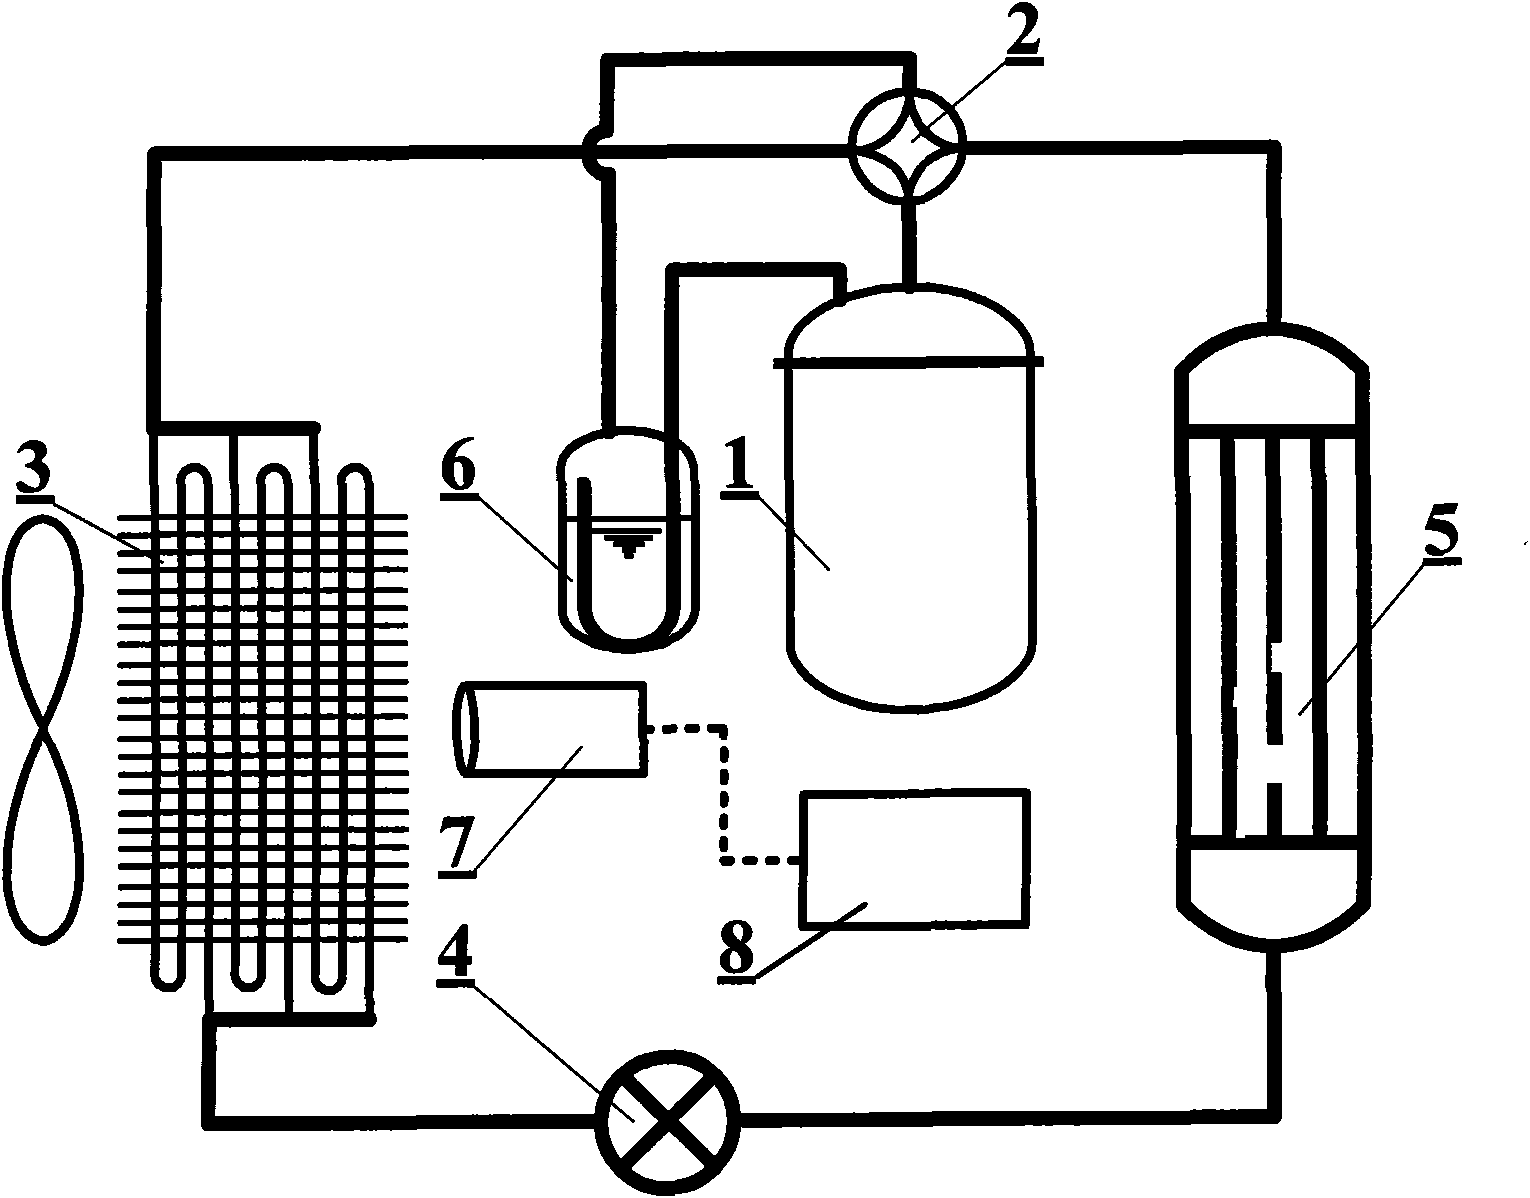 Image recognition technology-based air source heat pump defrosting system and control method thereof